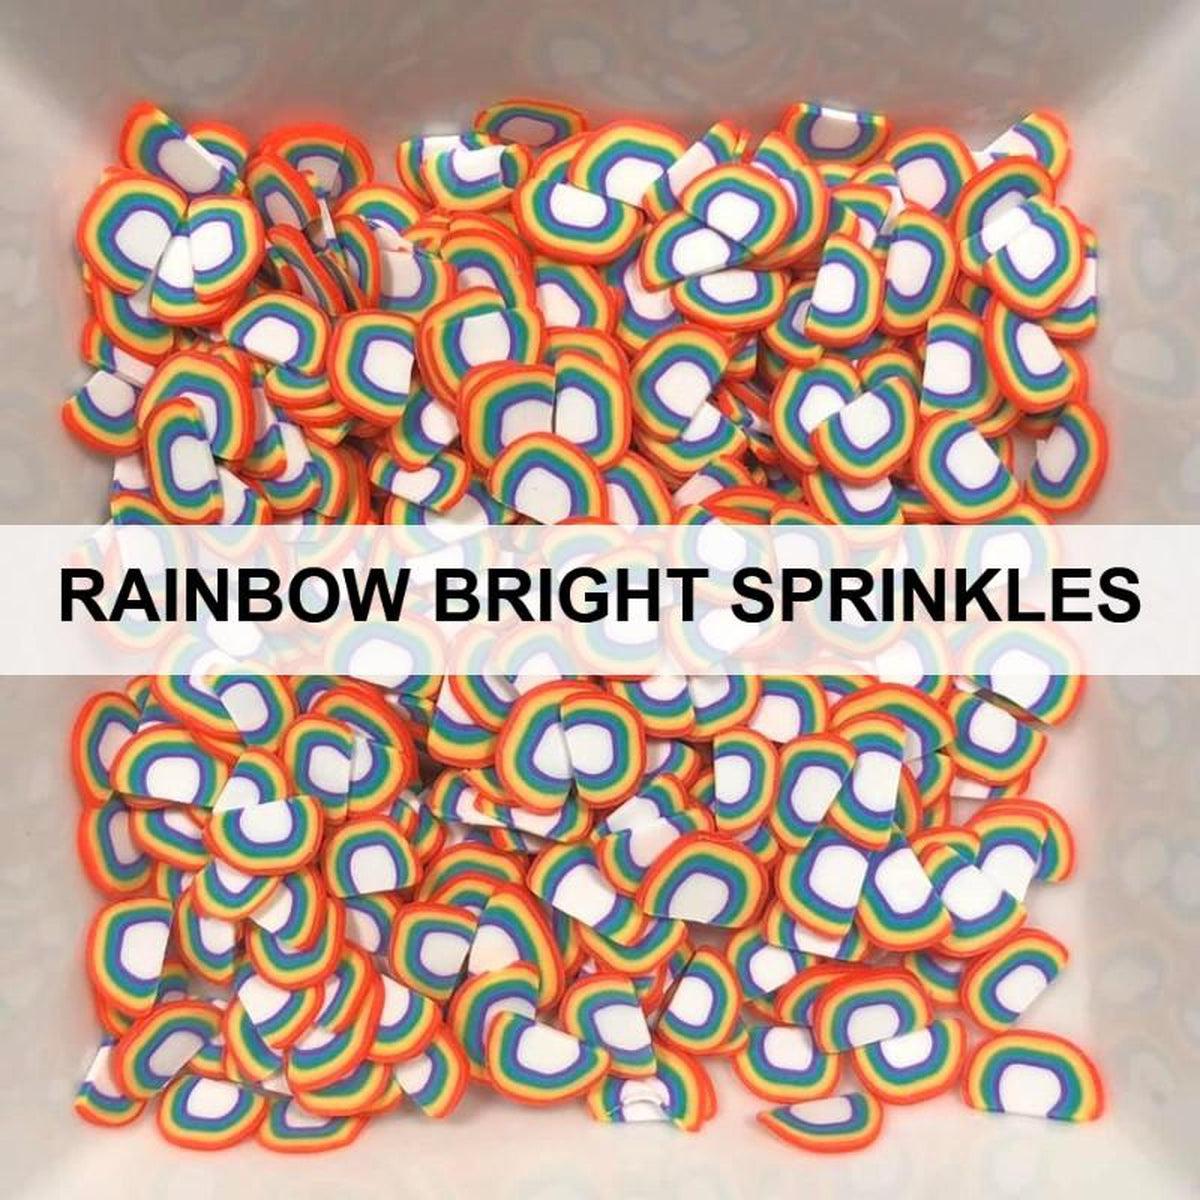 Rainbow Bright Sprinkles by Kat Scrappiness - Kat Scrappiness